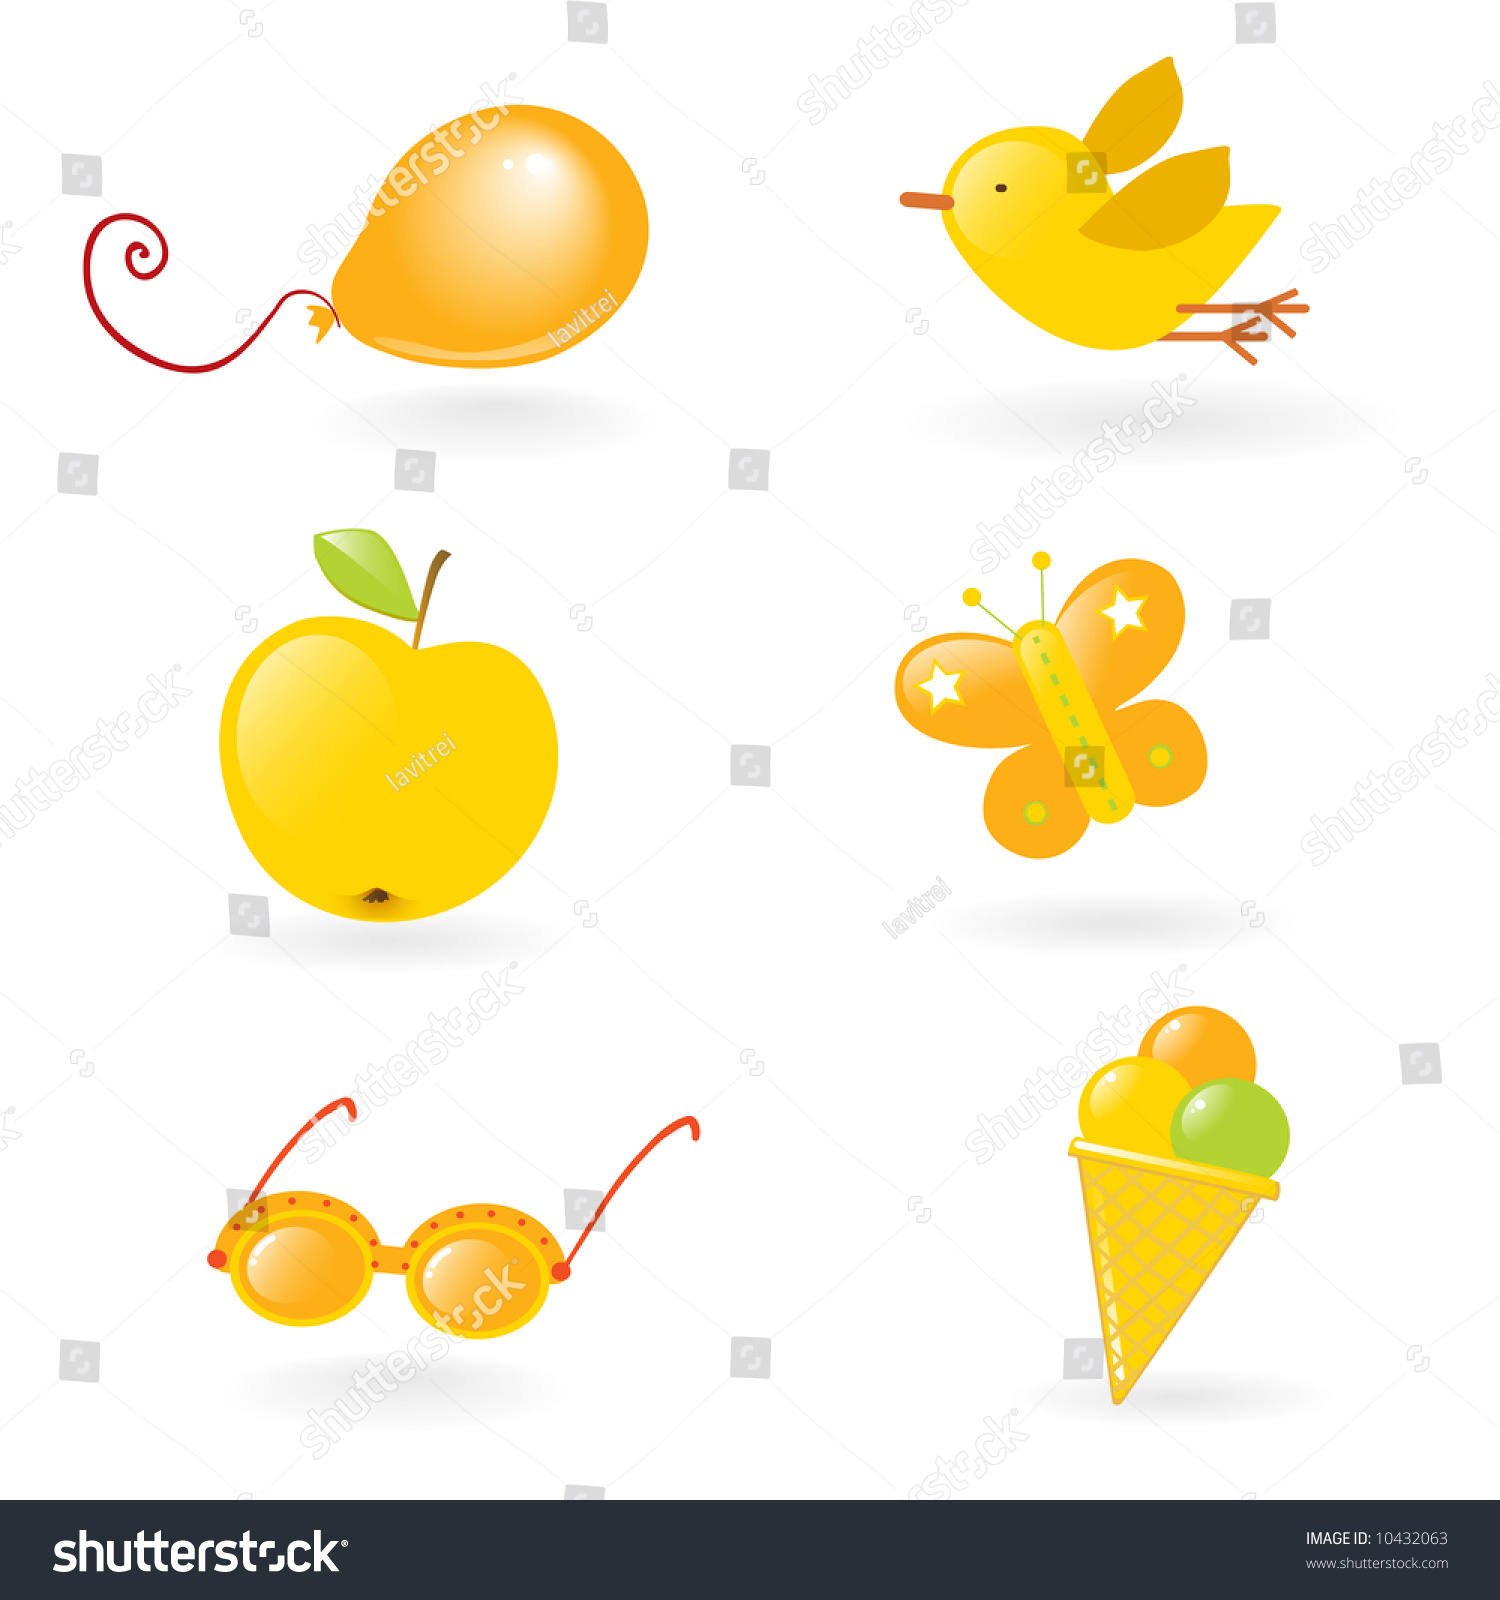 clipart yellow objects - photo #16